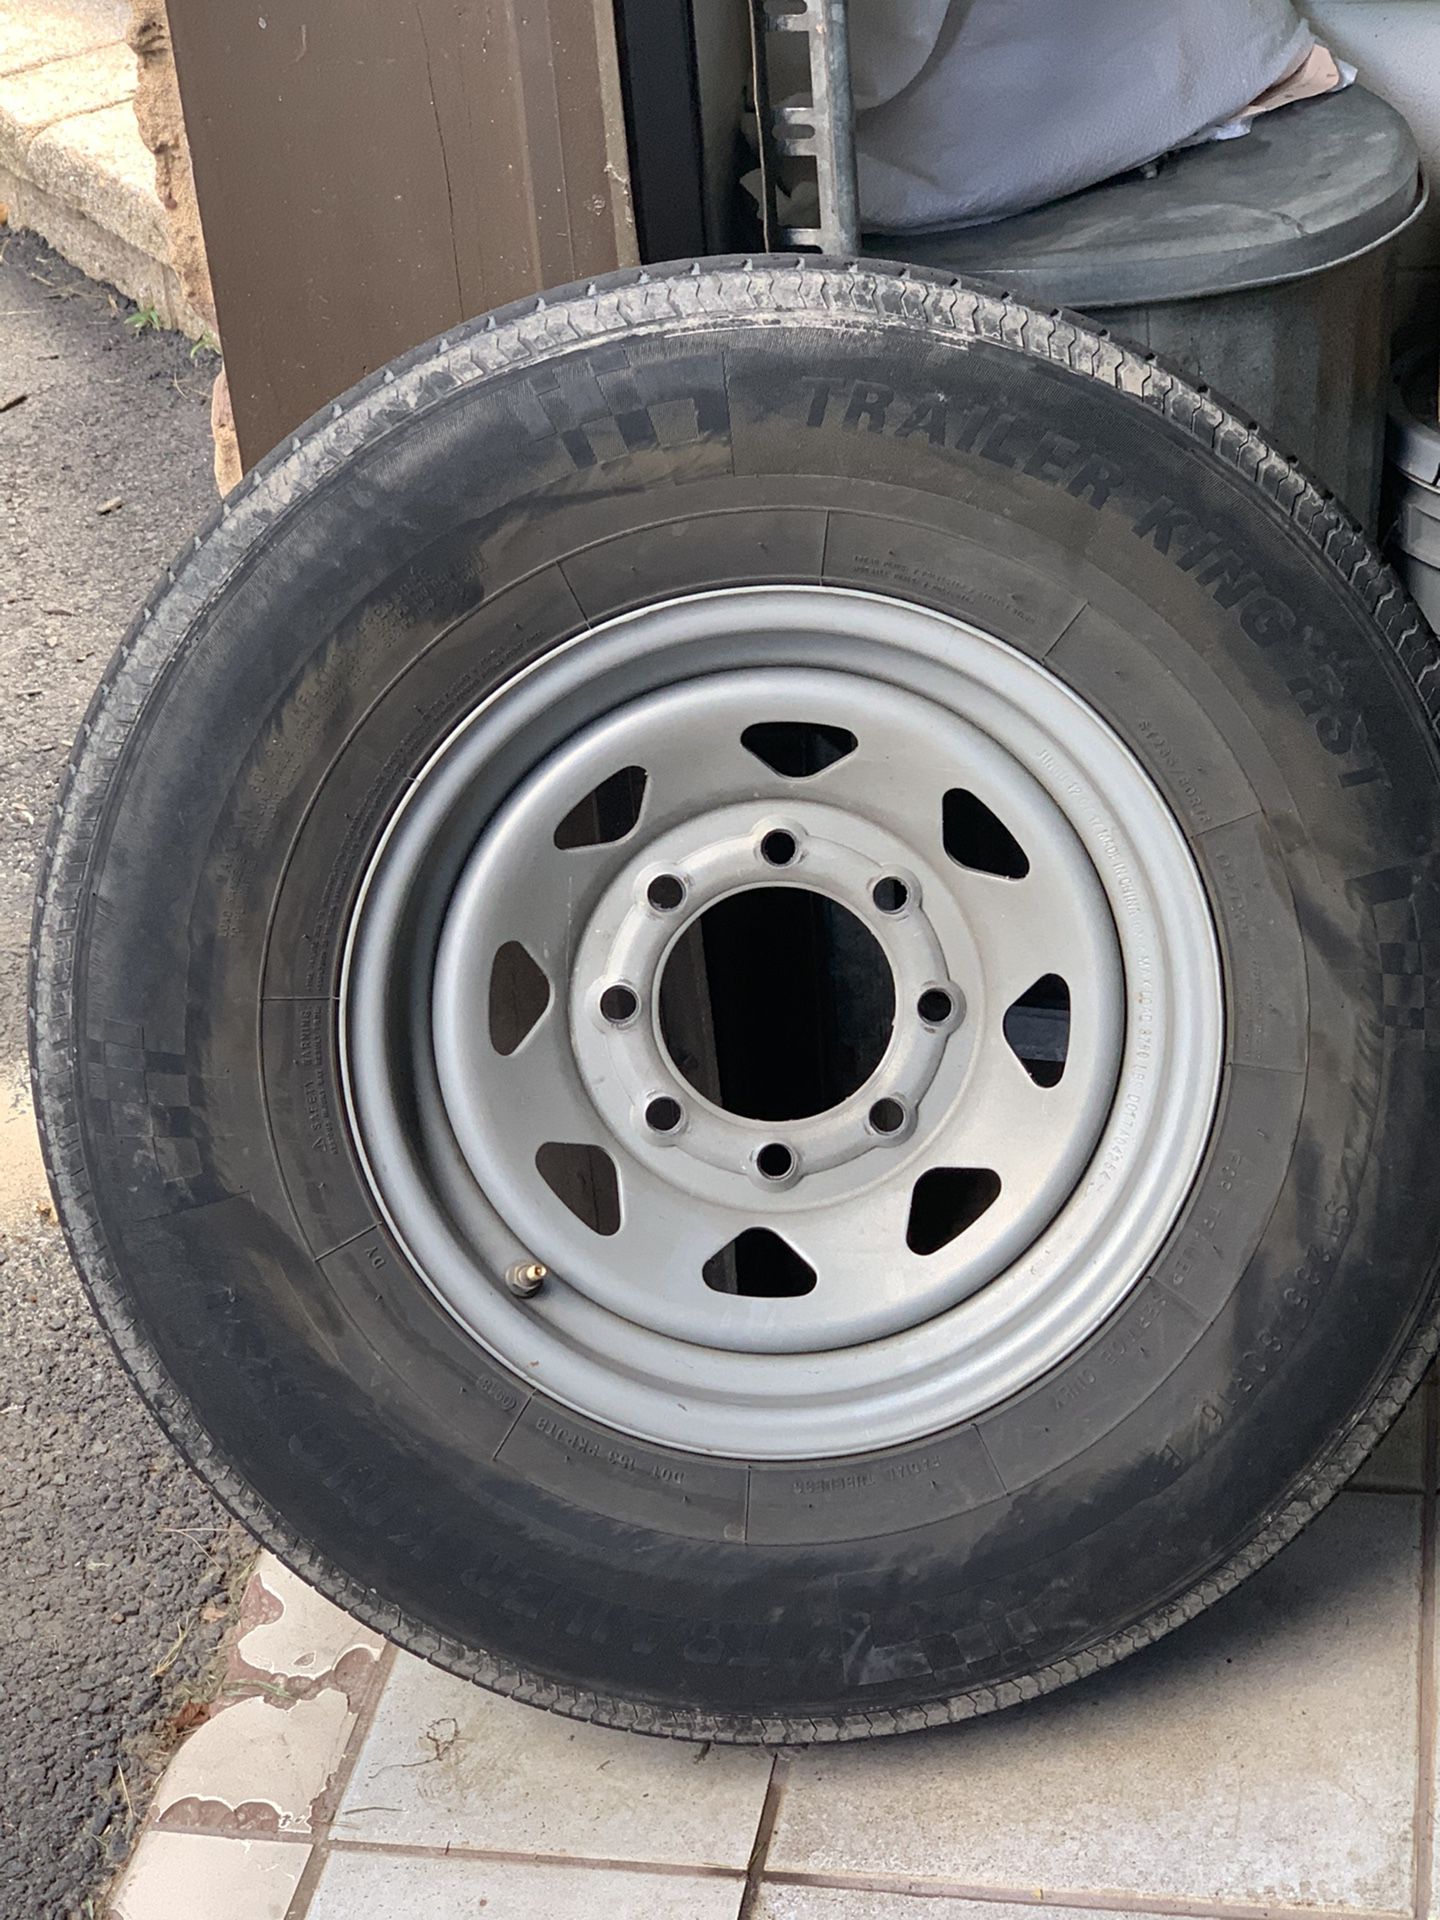 8 lug trailer tires and wheels